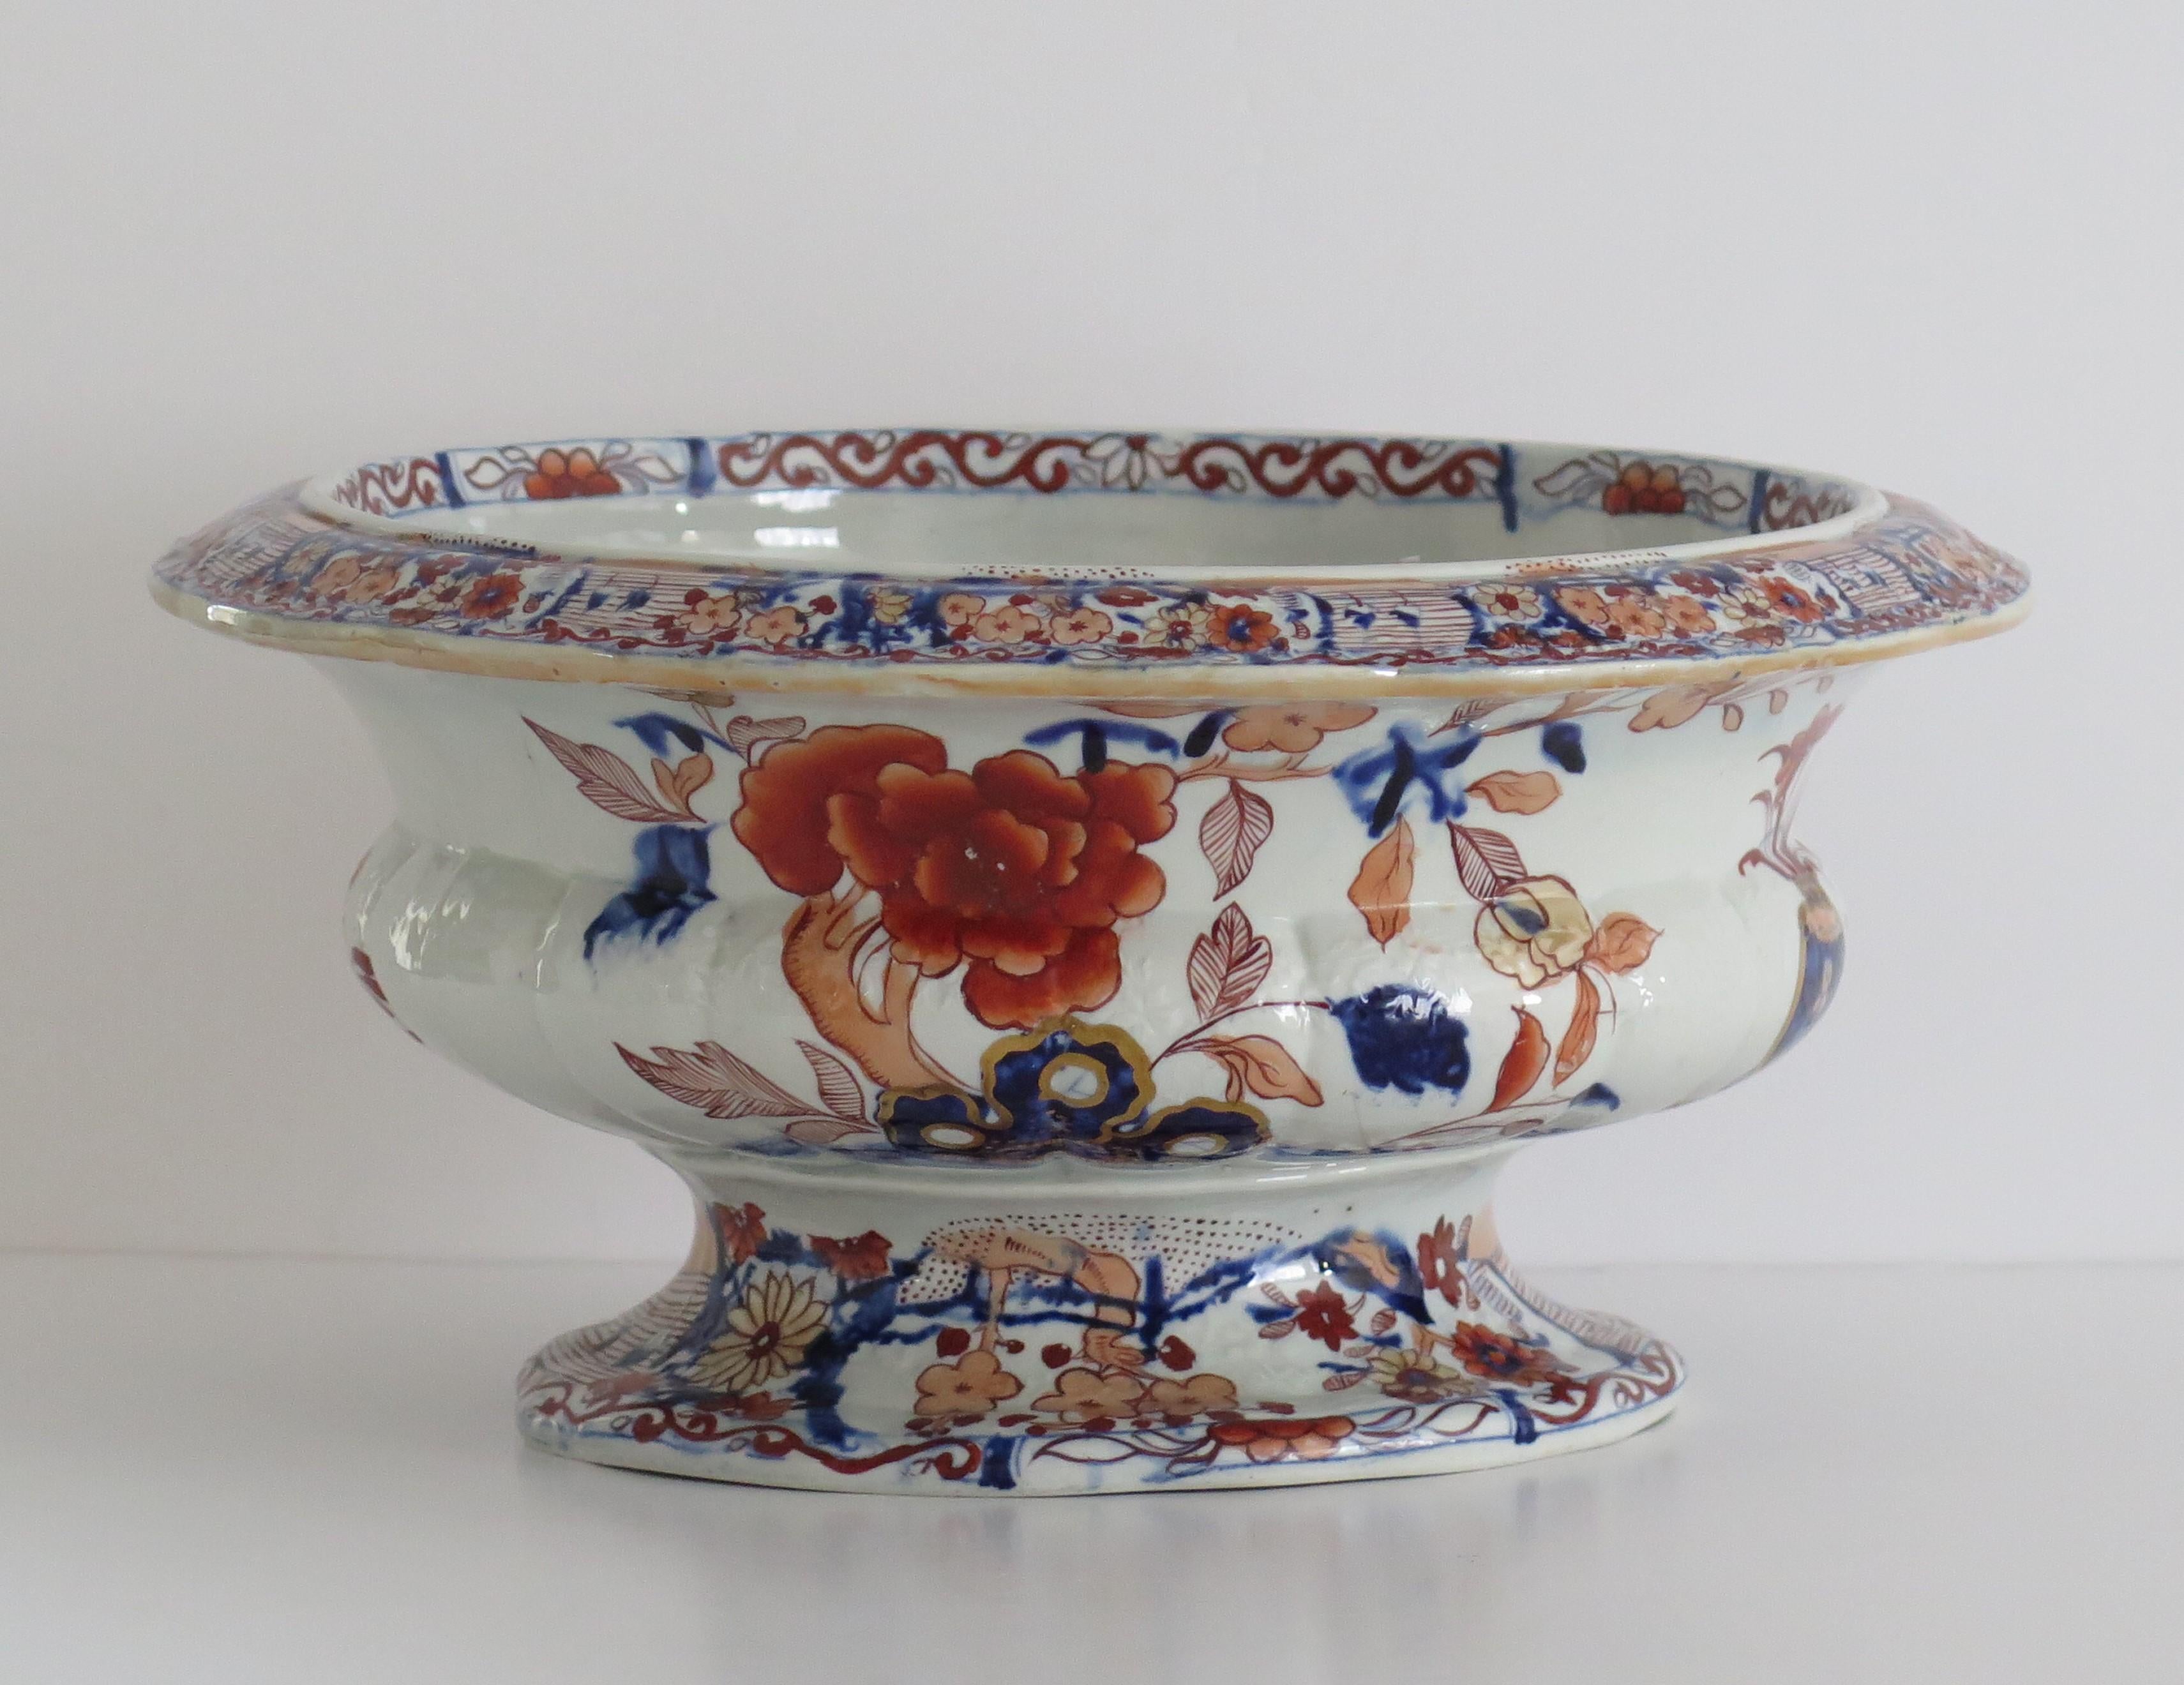 This is a rare, beautiful and very large open bowl made by Mason's Ironstone in the Peking Vase pattern, in the early 19th century, circa 1818.

Very large Mason's bowls in this shape are very rare. 

The bowl is circular with an everted wavy